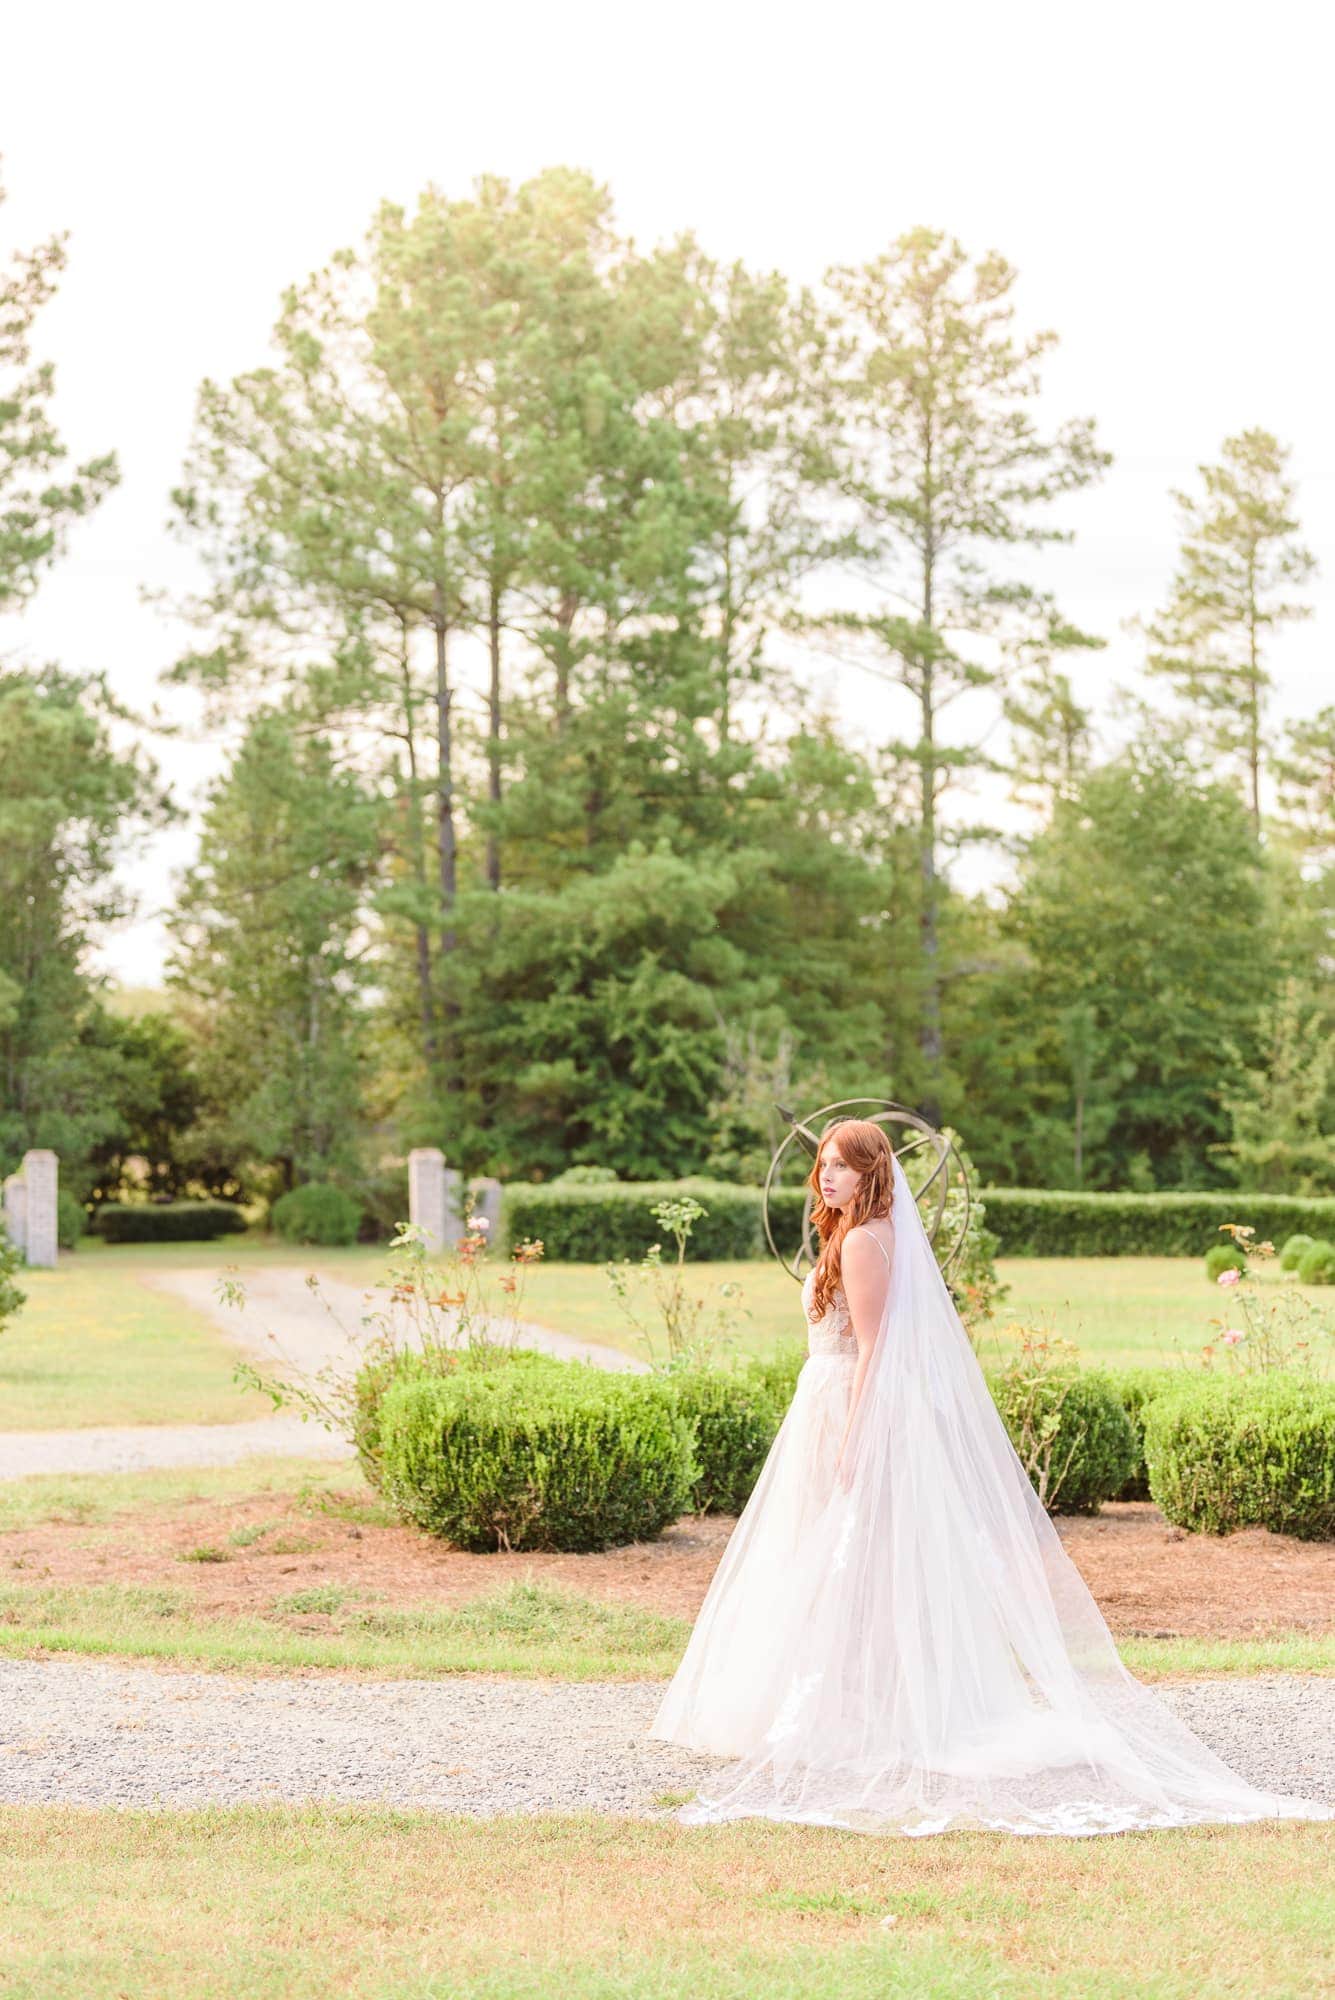 You can see the driveway entrance to the Key Rose Estate Venue in Fayetteville as Olivia walks the grounds.